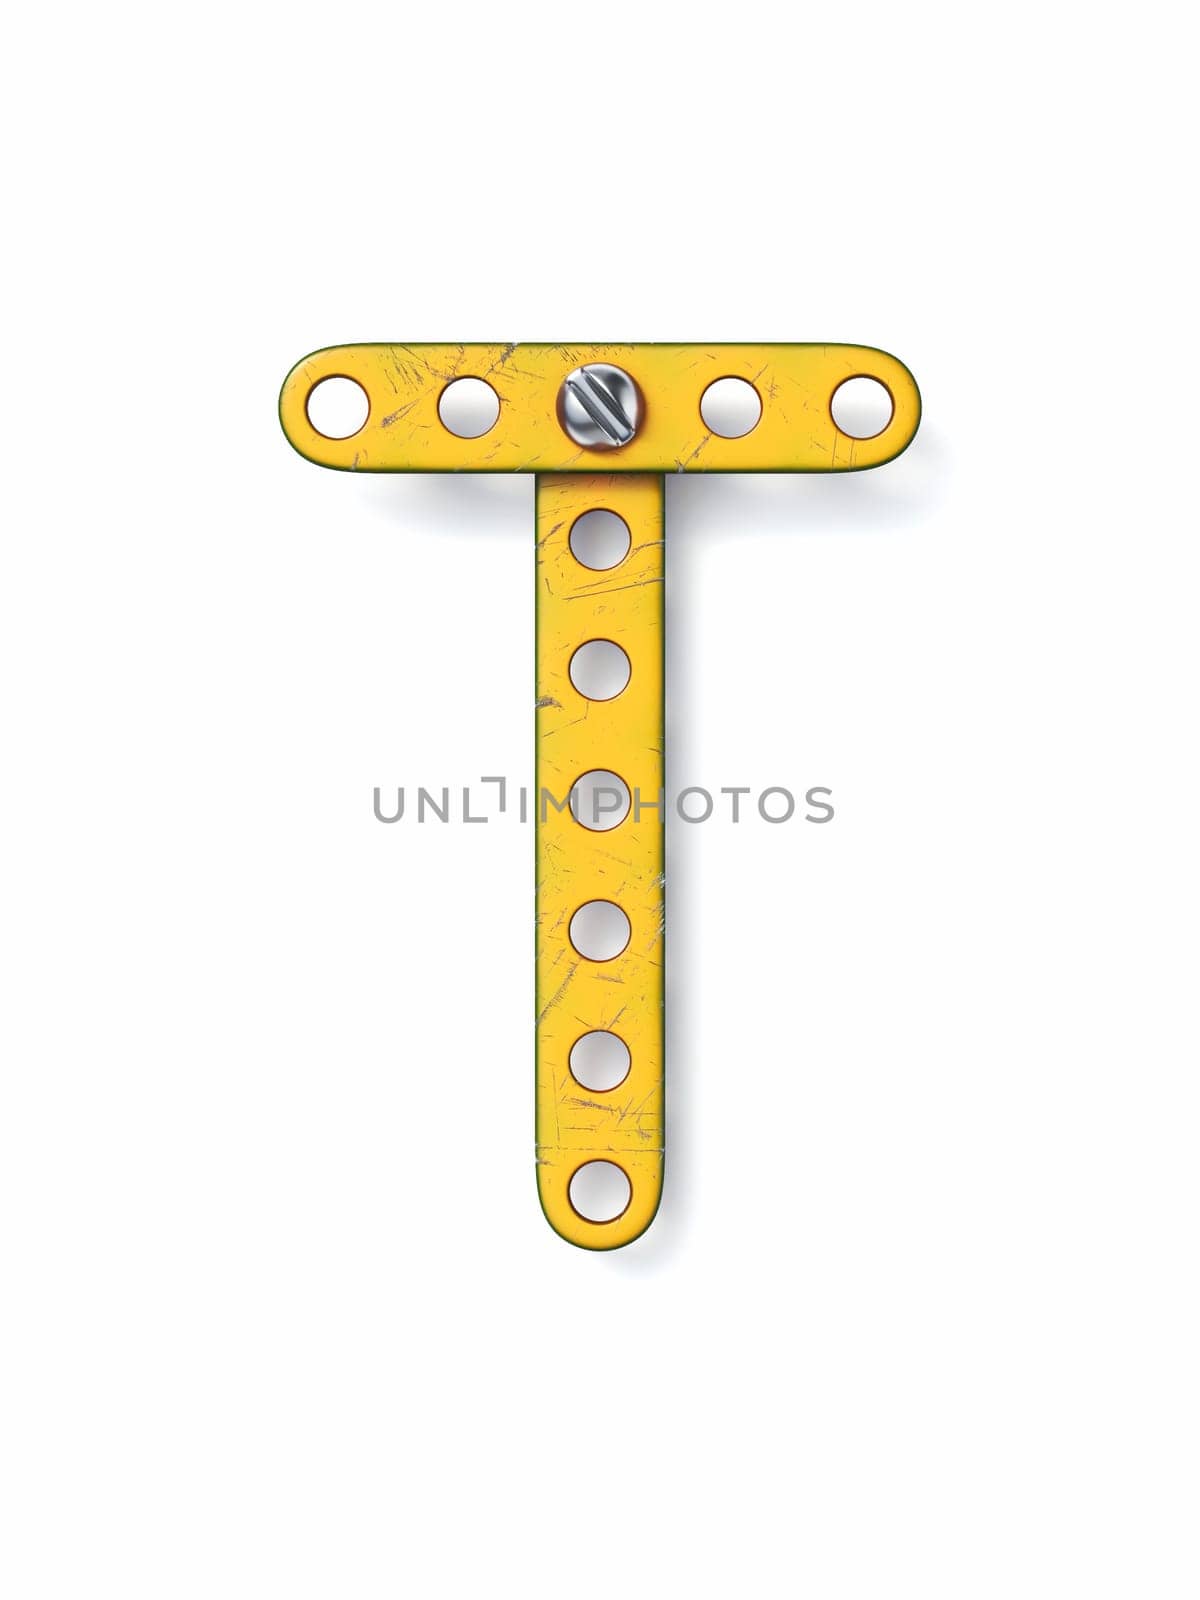 Aged yellow constructor font Letter T 3D rendering illustration isolated on white background